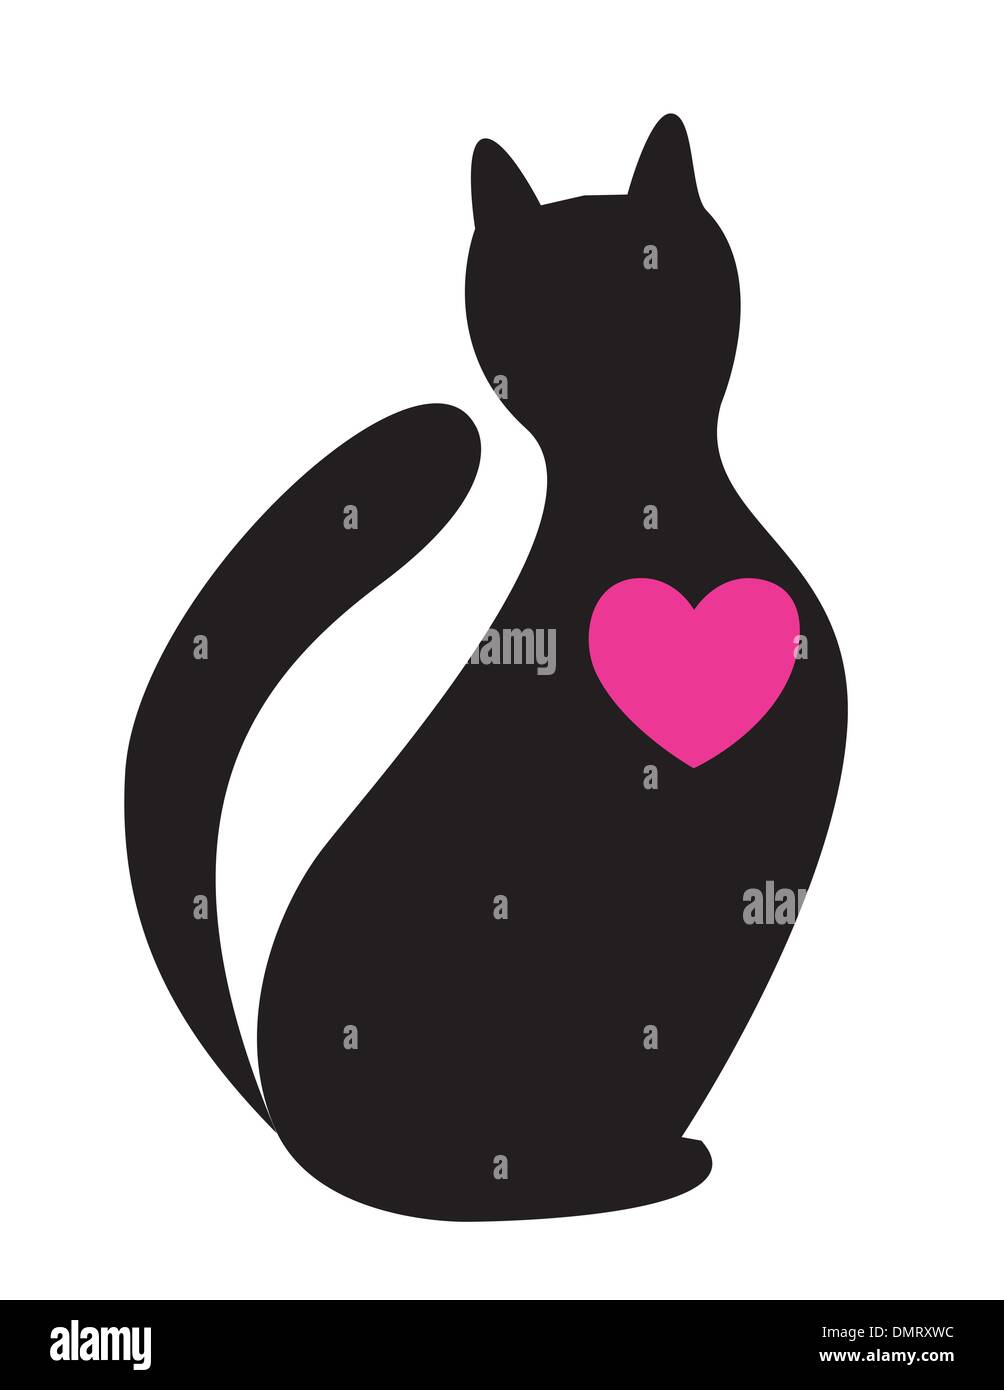 Silhouette of cat Stock Vector